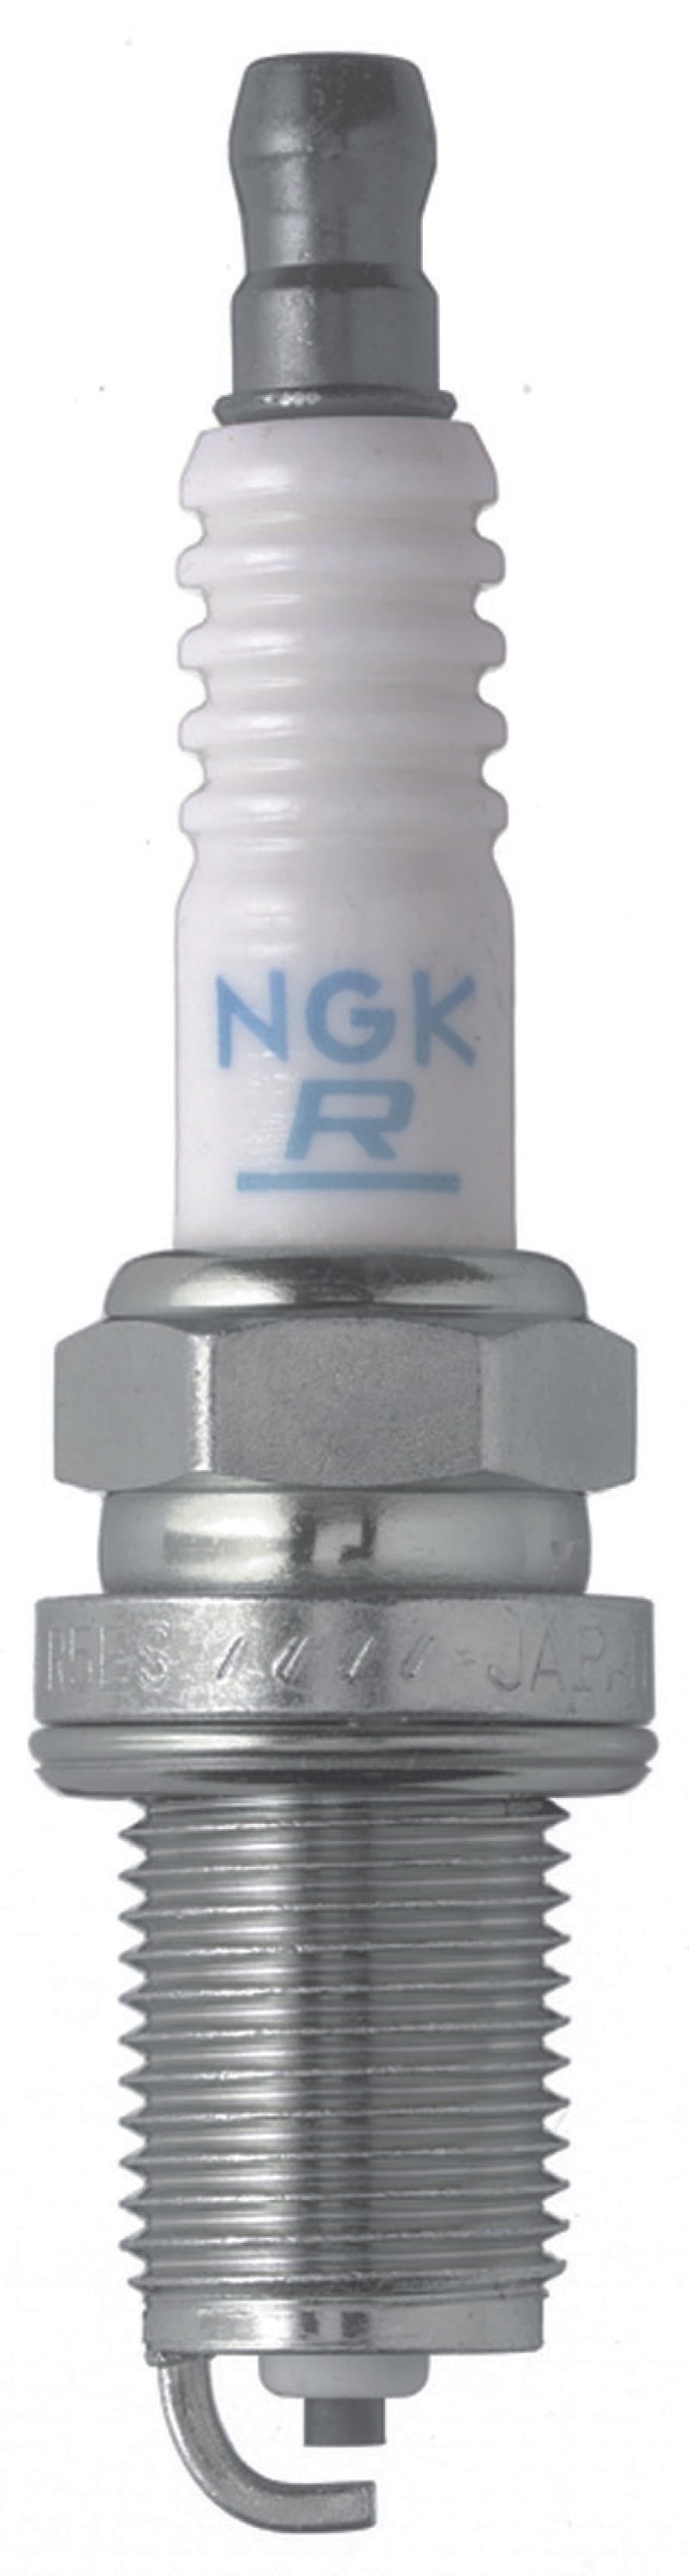 NGK Traditional Spark Plugs Box of 4 (BCPR7ES-11).